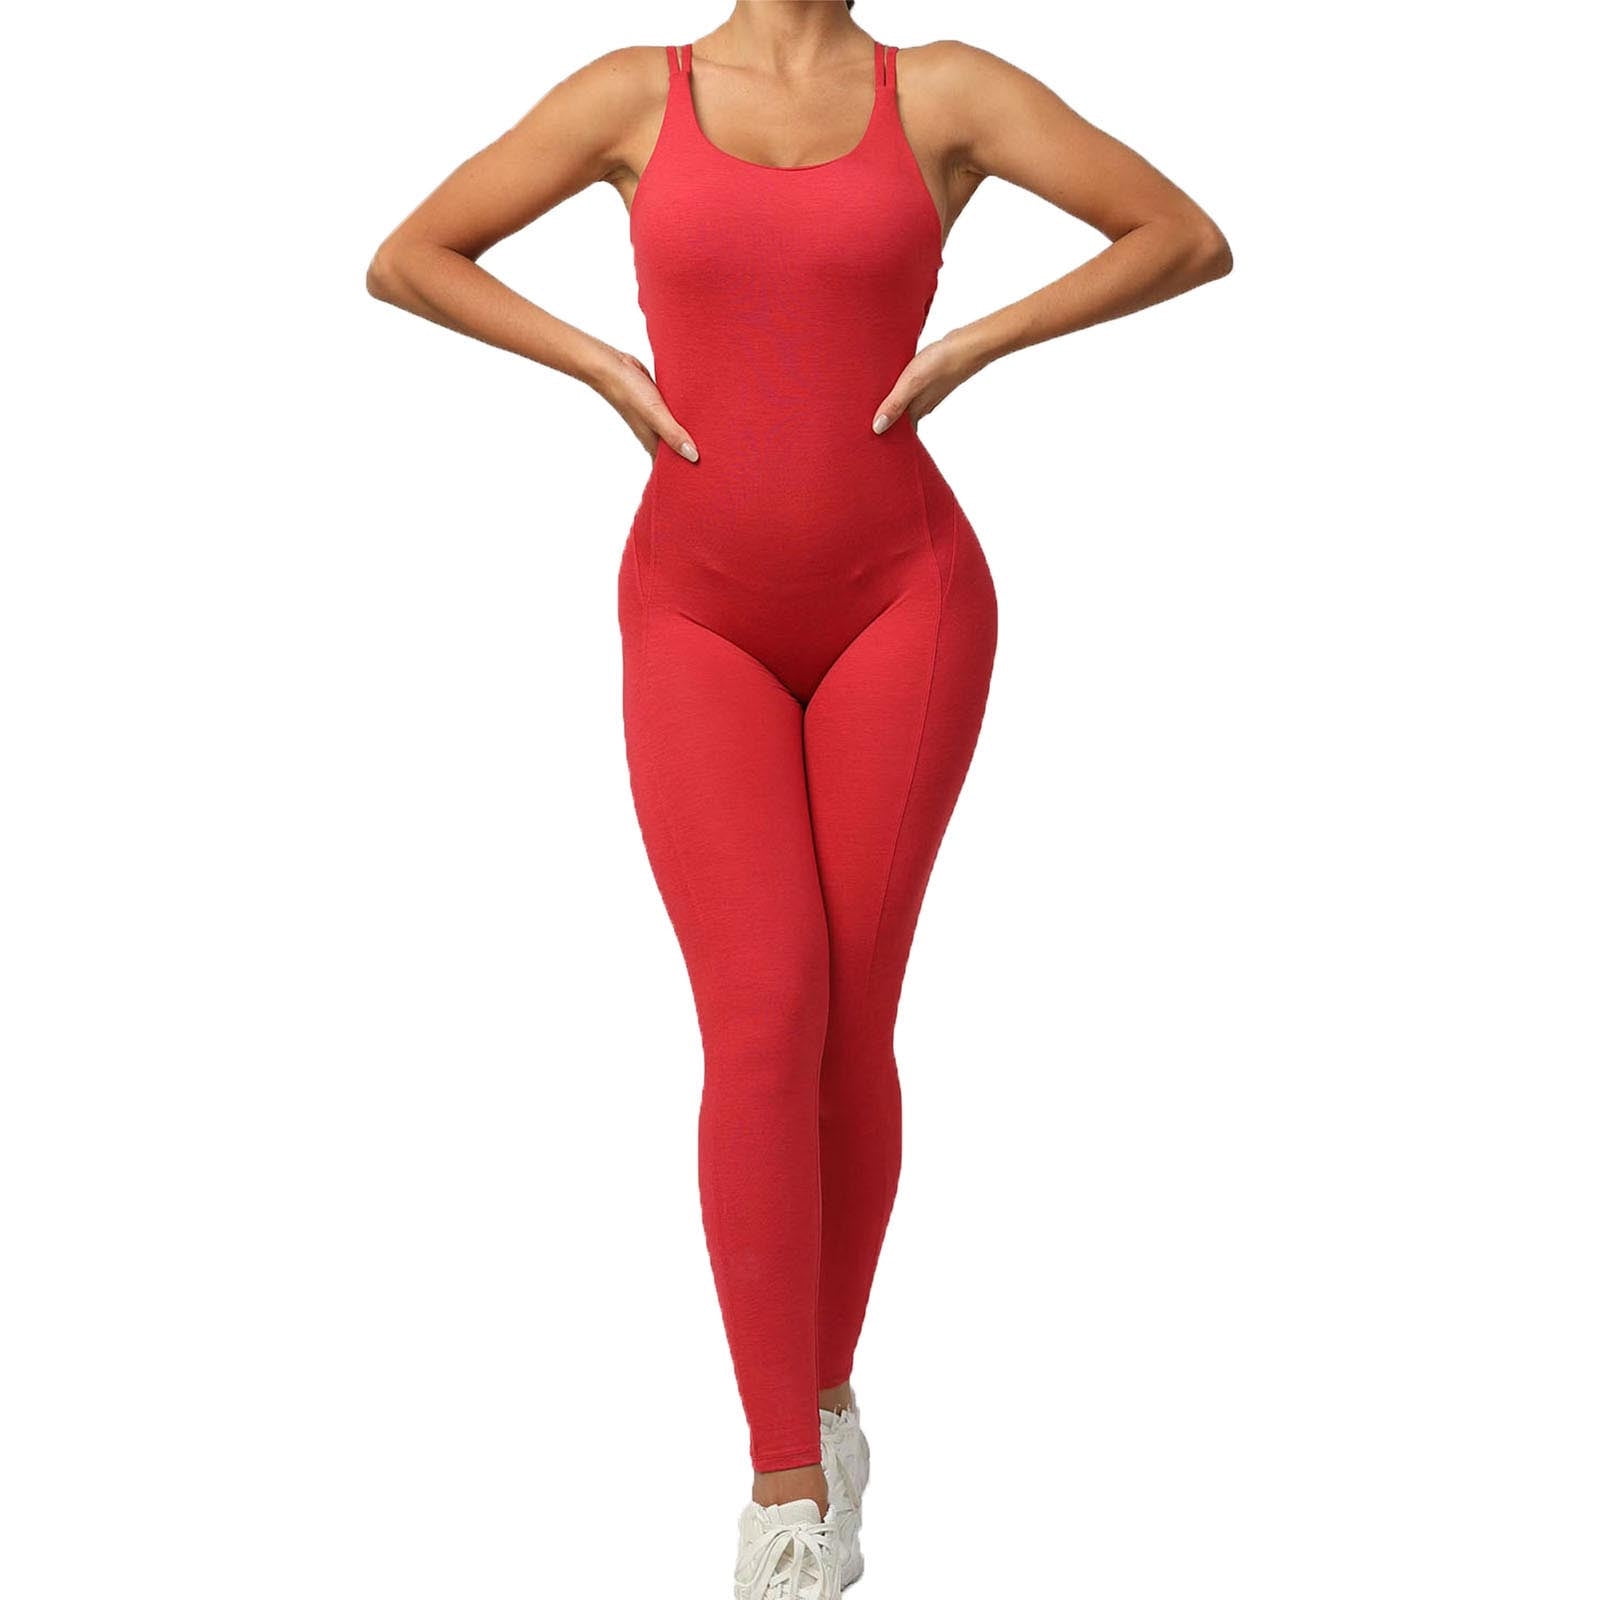 Black A Line Skirt Athletics Motion Leggings Rainbow Romper Red Leggings  for Women Legging Pants for Women Sexy Jumpsuit for Women Party Club Night  Yoga Pants Warehouse  Warehouse Deals at